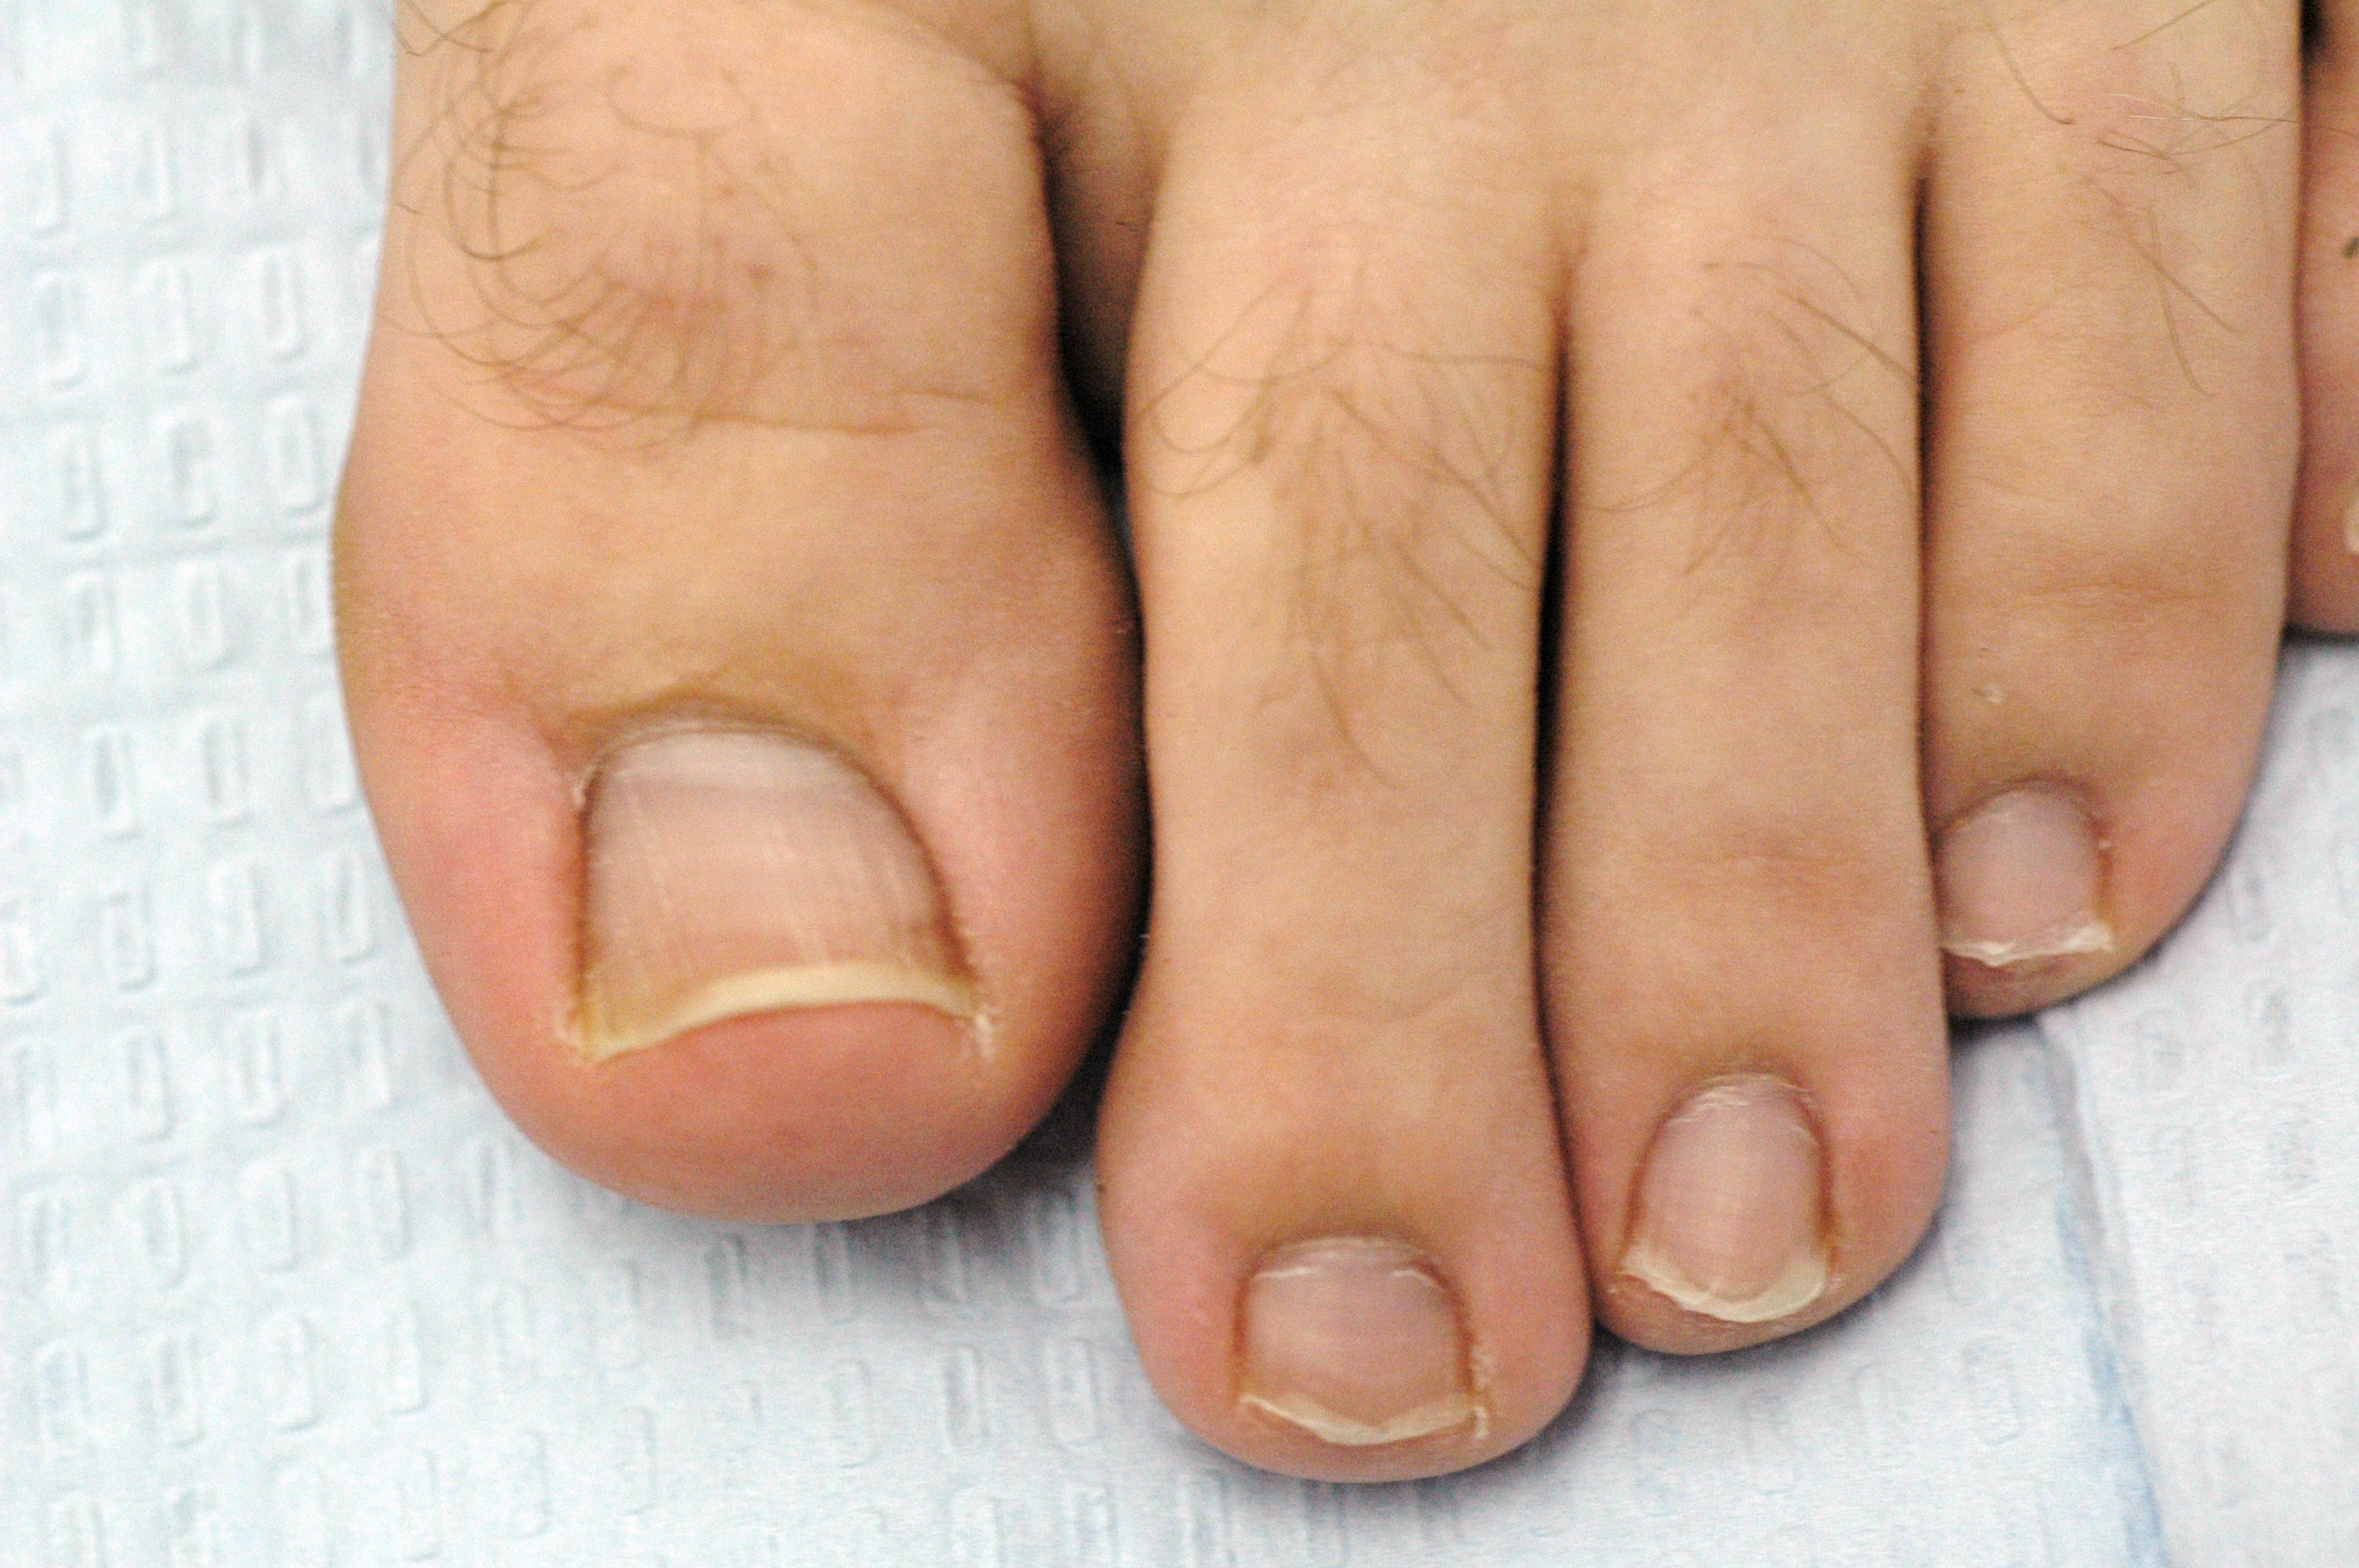 Bunion Misdiagnosis: Health Problems You Can Mistake for Bunions